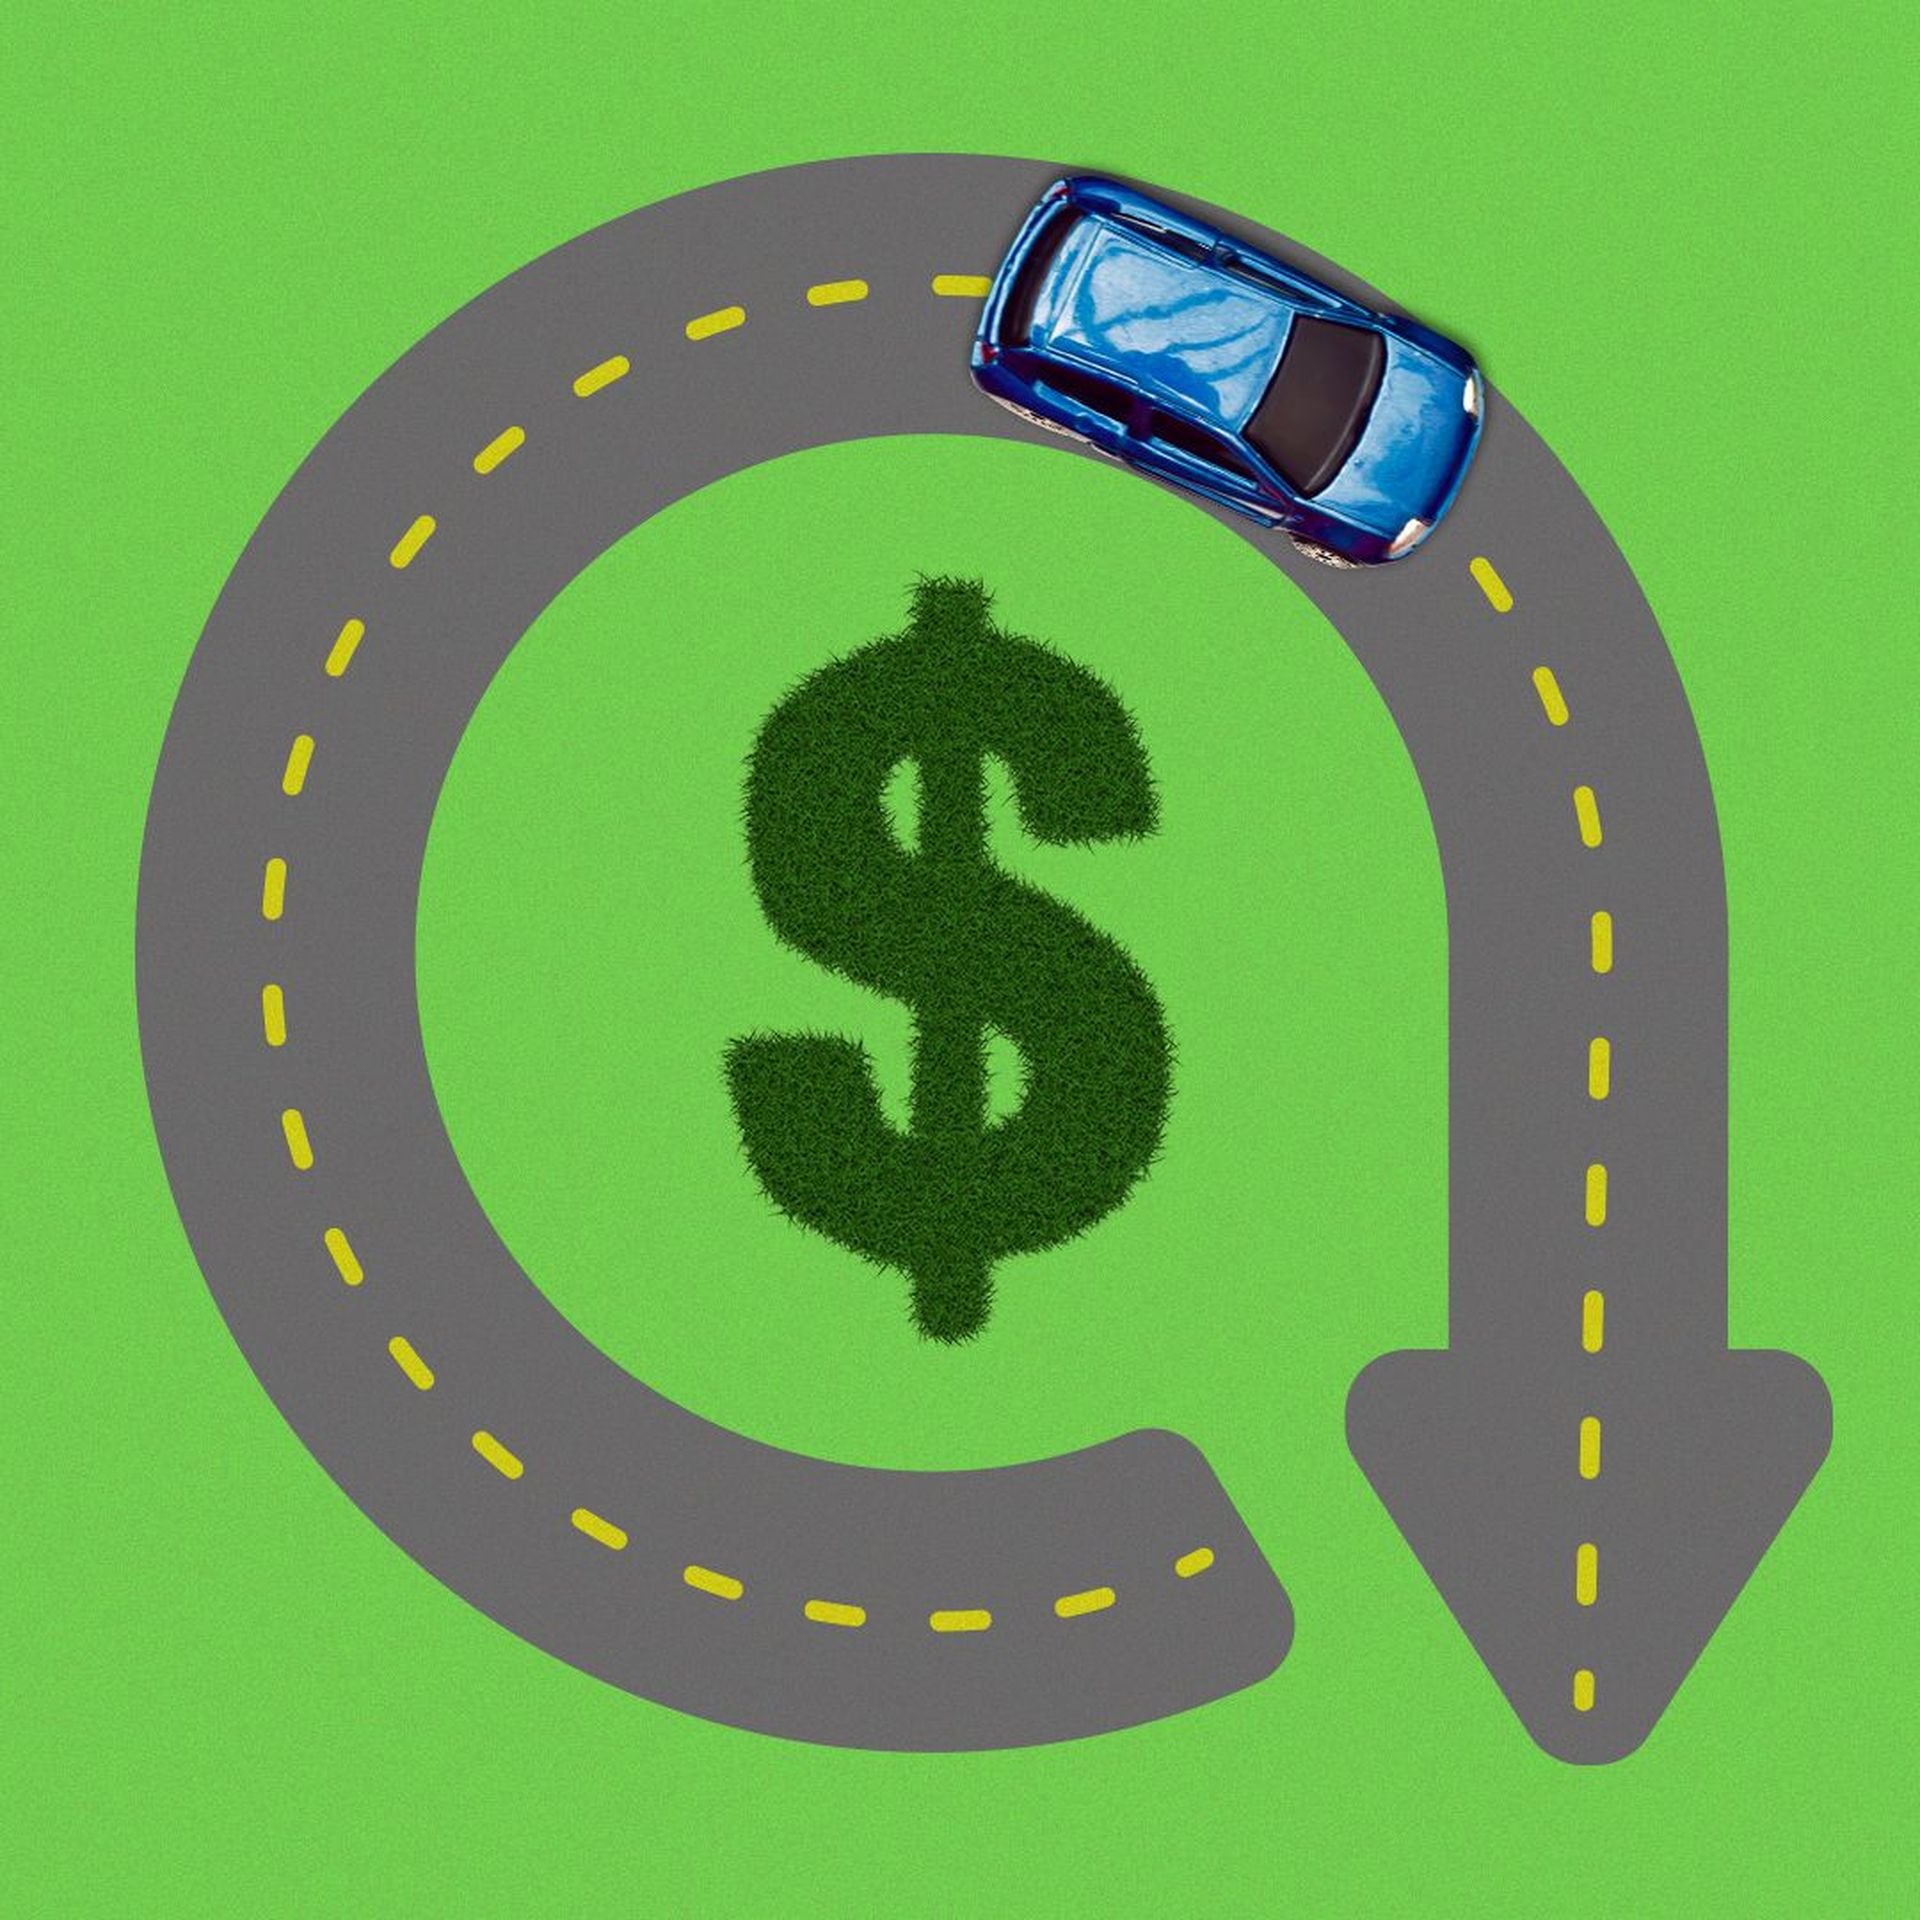 Illustration of a lower prices icon comprised of a road circling a patch of grass that is in the shape of a dollar sign.